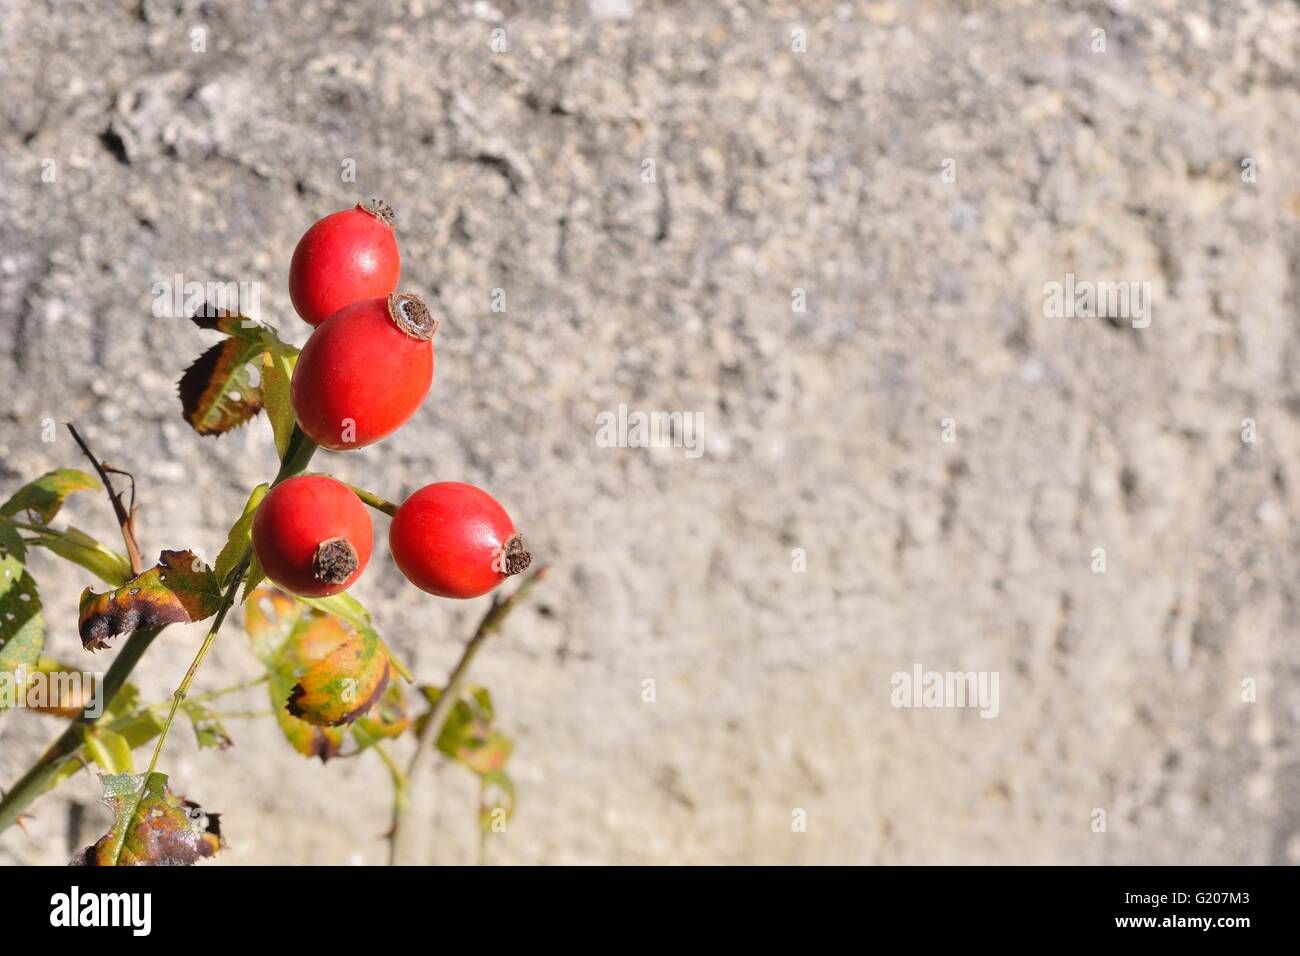 Briar, wild rosehip shrub in nature with blurred stone in background Stock Photo